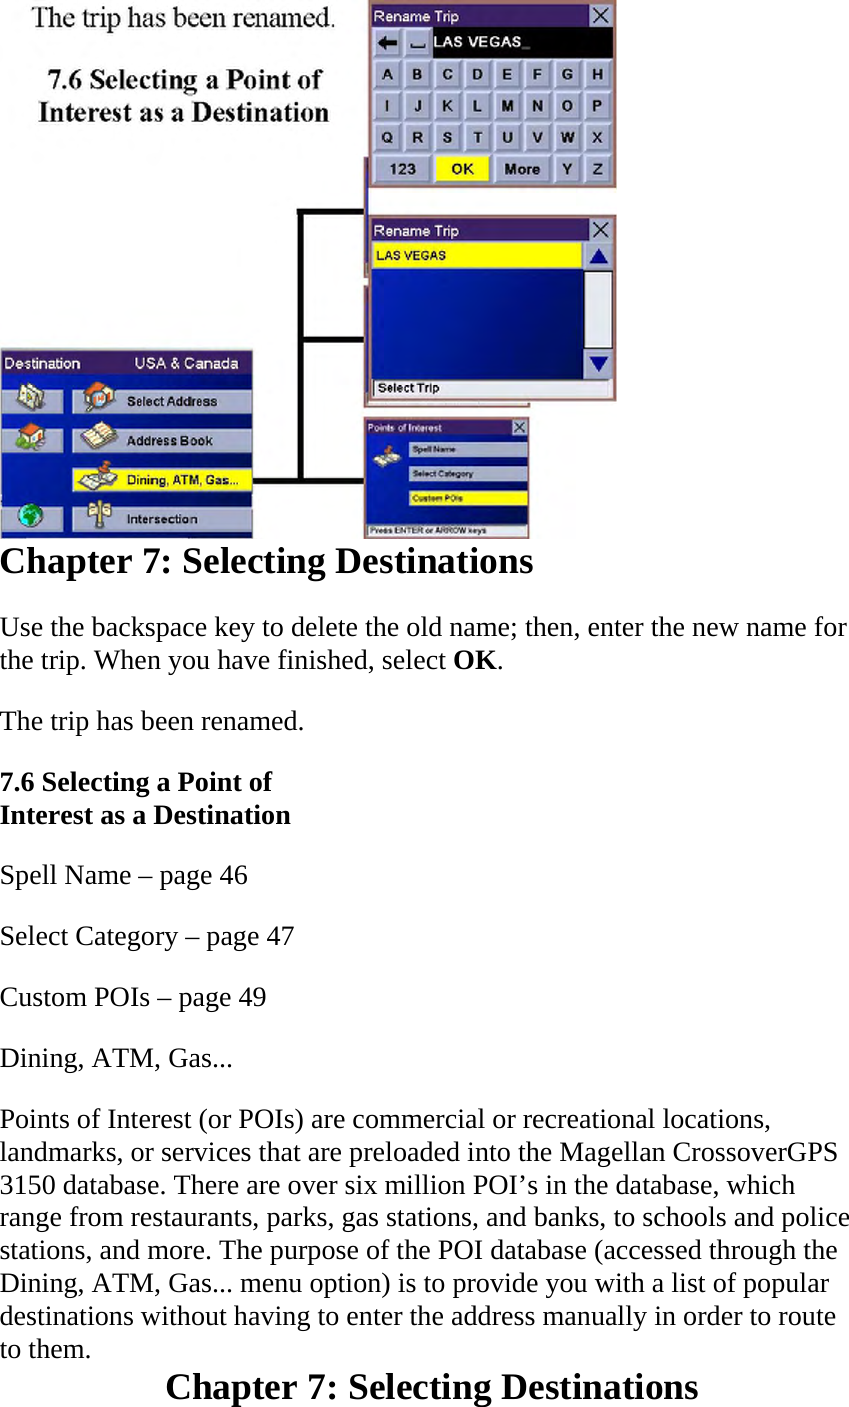  Chapter 7: Selecting Destinations  Use the backspace key to delete the old name; then, enter the new name for the trip. When you have finished, select OK.  The trip has been renamed.  7.6 Selecting a Point of Interest as a Destination  Spell Name – page 46  Select Category – page 47  Custom POIs – page 49  Dining, ATM, Gas...  Points of Interest (or POIs) are commercial or recreational locations, landmarks, or services that are preloaded into the Magellan CrossoverGPS 3150 database. There are over six million POI’s in the database, which range from restaurants, parks, gas stations, and banks, to schools and police stations, and more. The purpose of the POI database (accessed through the Dining, ATM, Gas... menu option) is to provide you with a list of popular destinations without having to enter the address manually in order to route to them.  Chapter 7: Selecting Destinations  